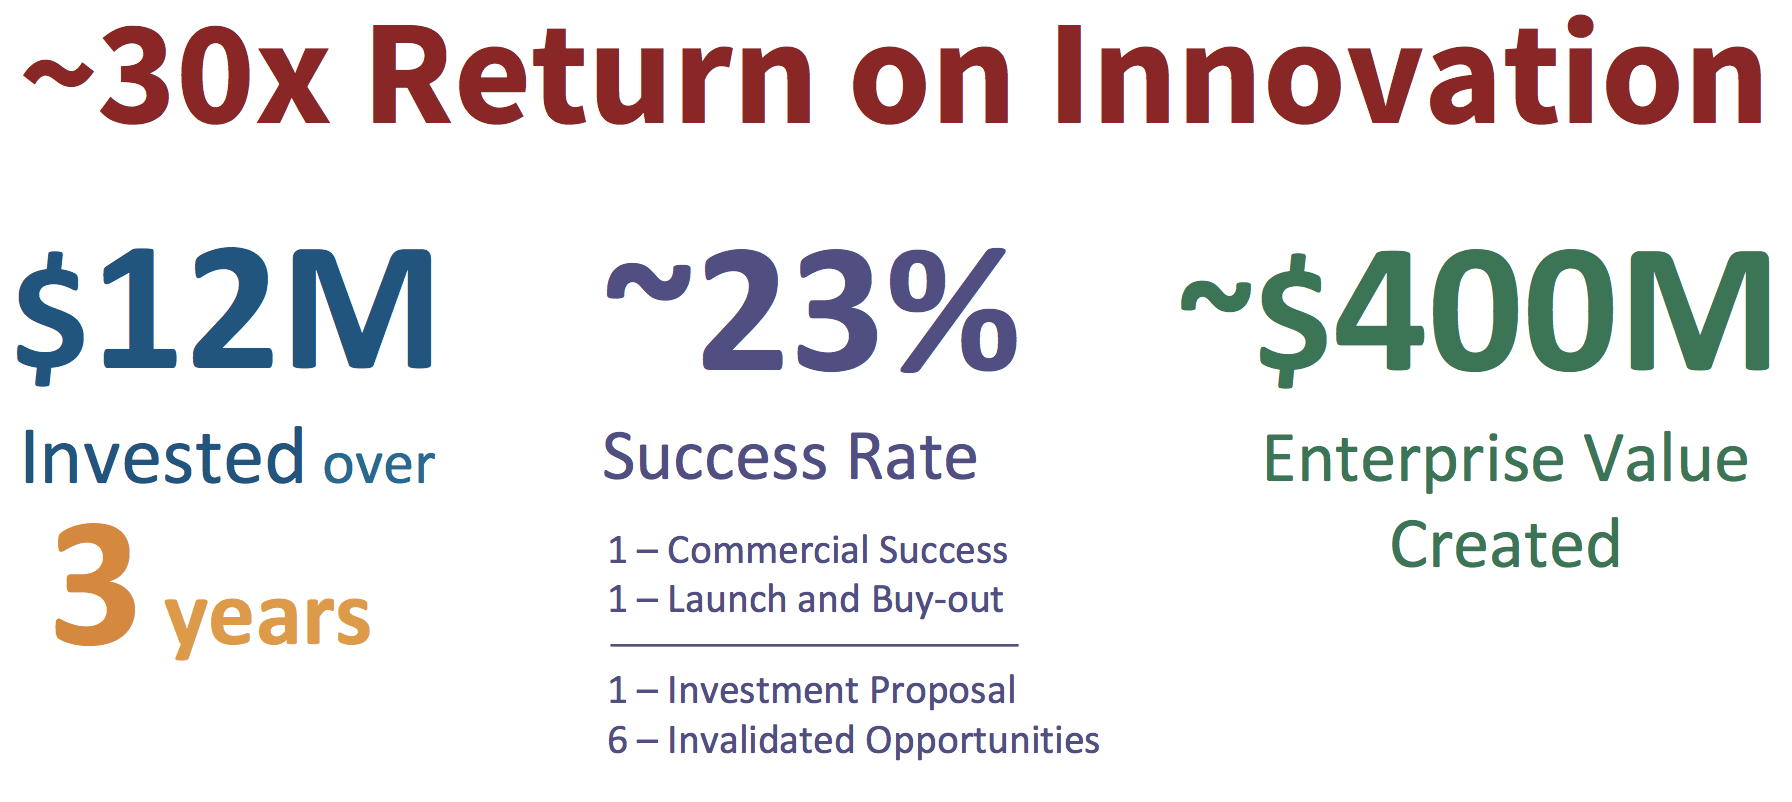 Innovation Infographic with 30x Return on Innovation